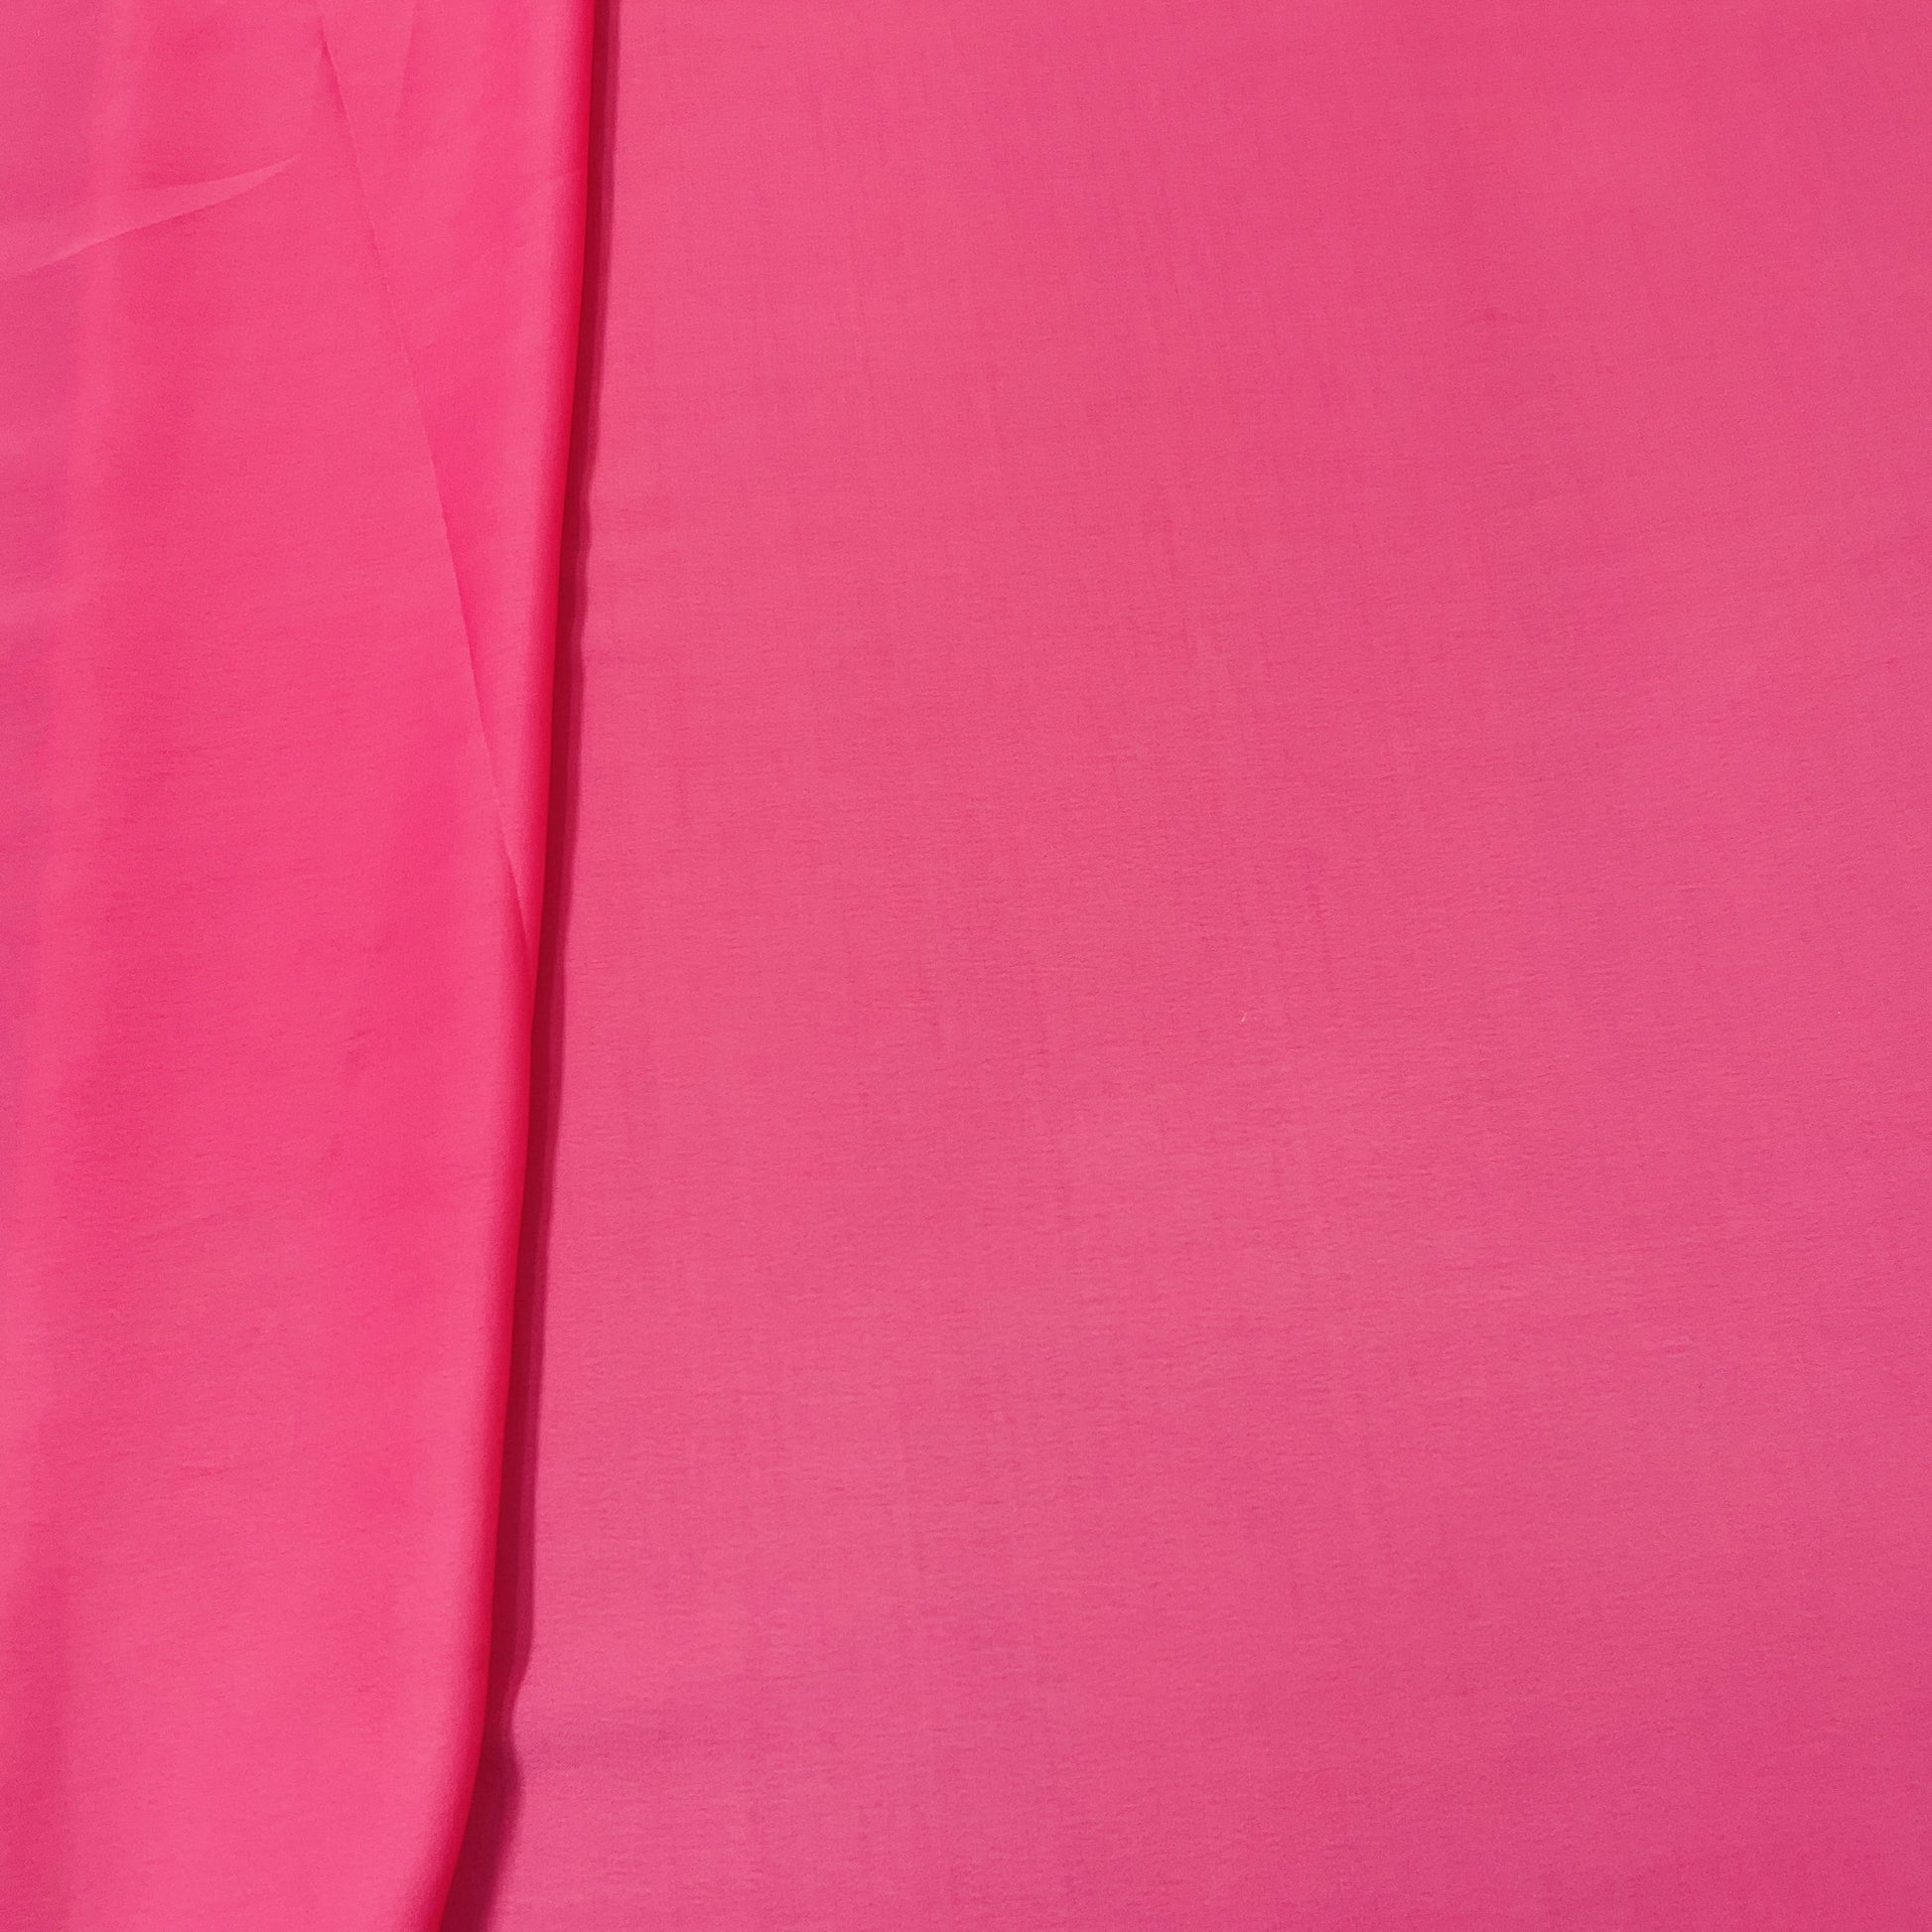 Exclusive Hot Pink Solid Milano Crepe Fabric